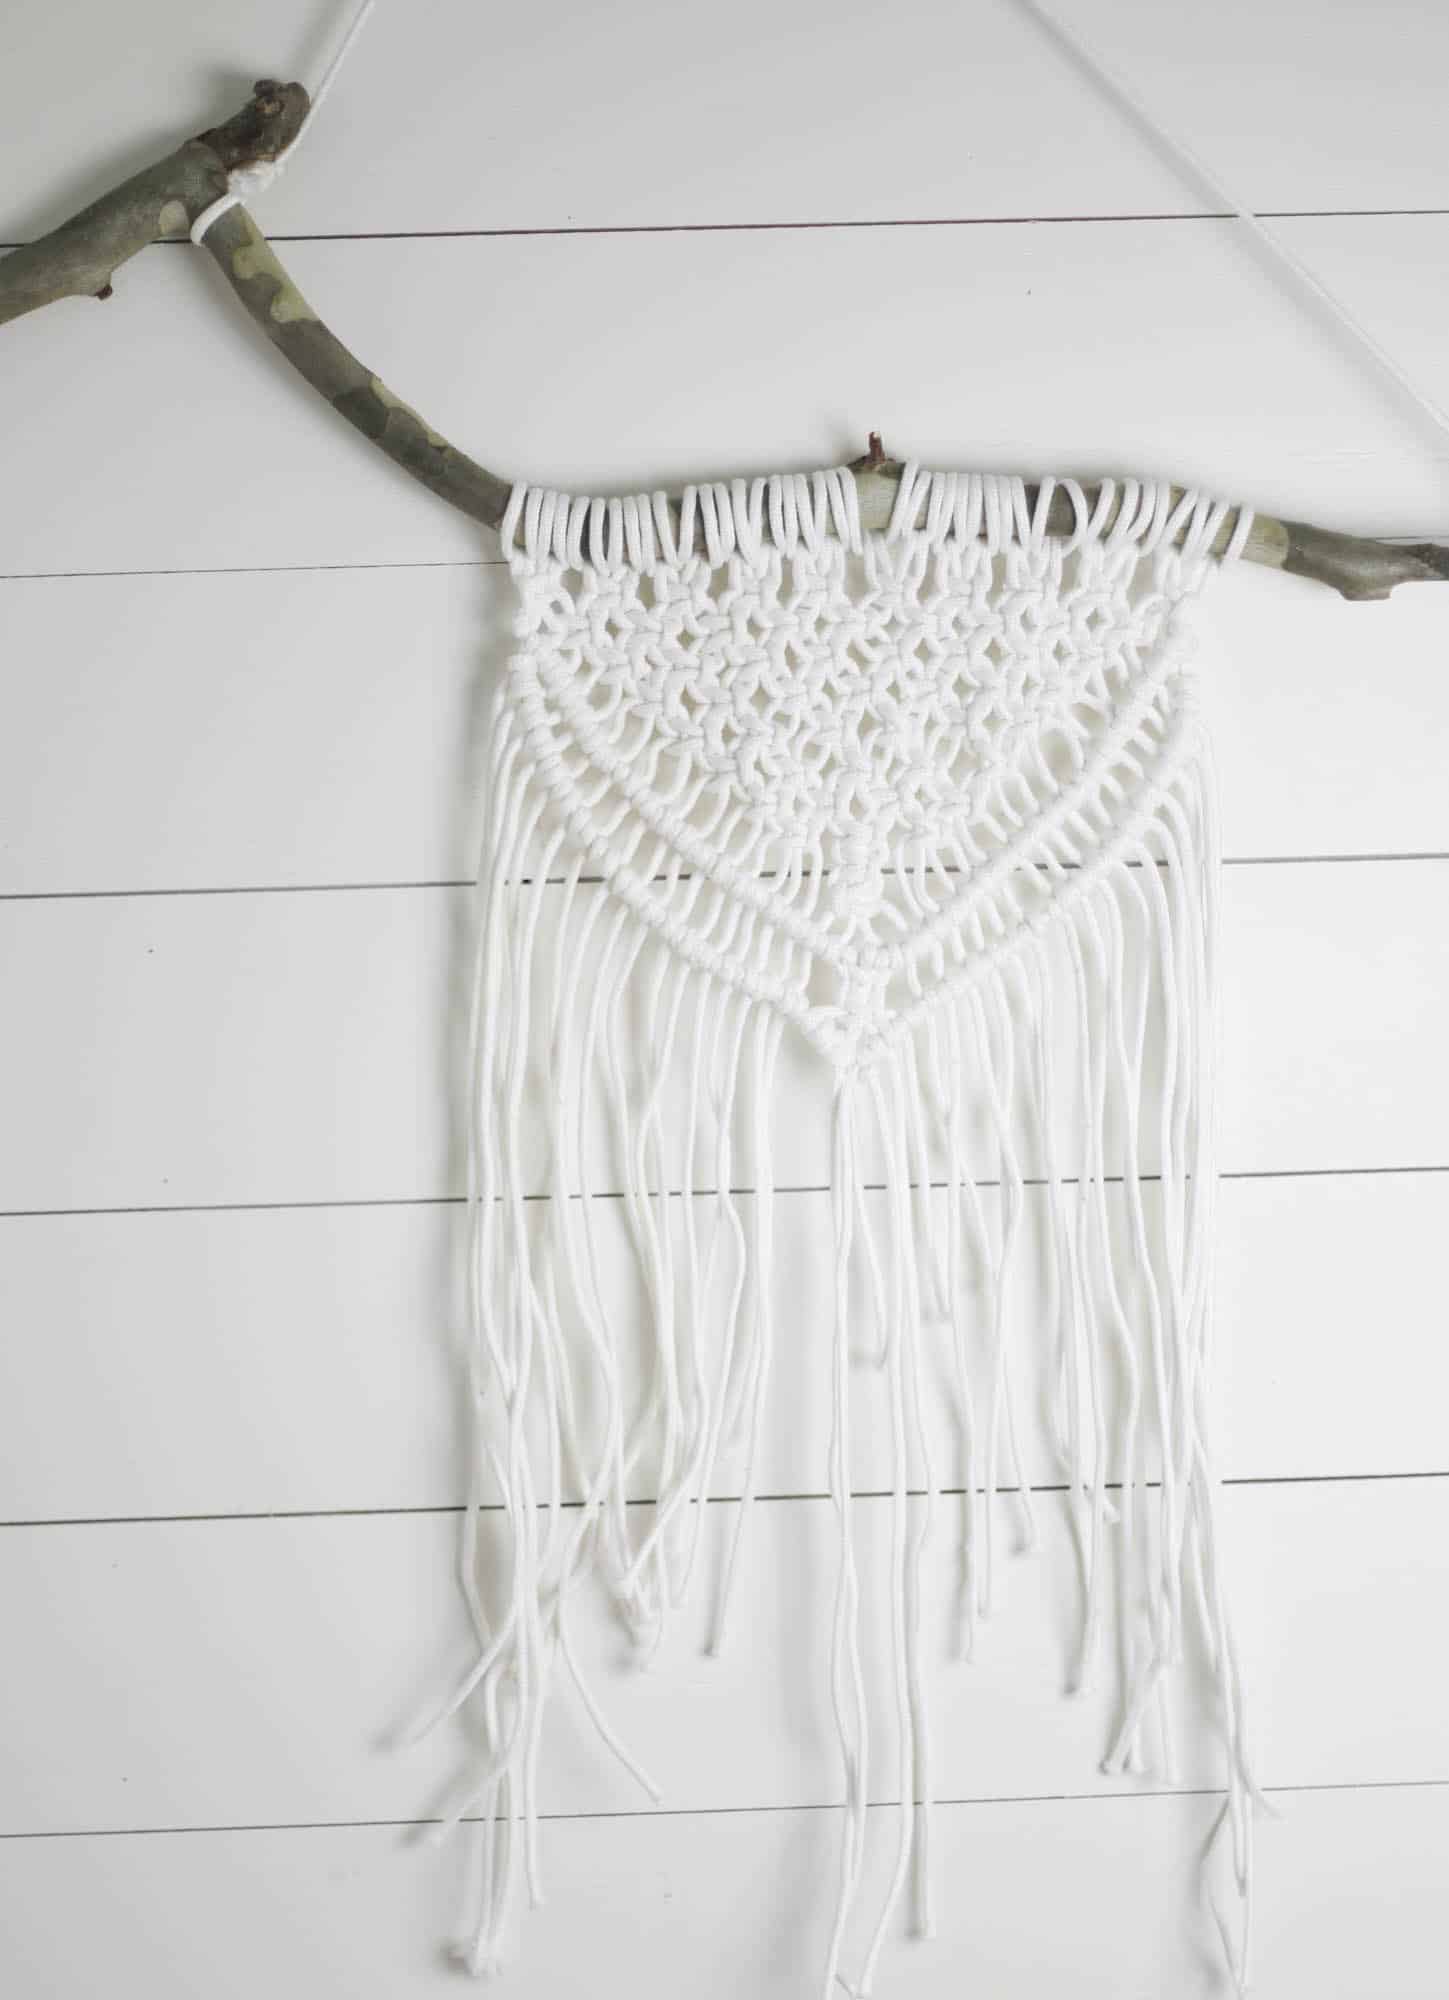 Macrame Wall Hanging DIY Tutorial with Video